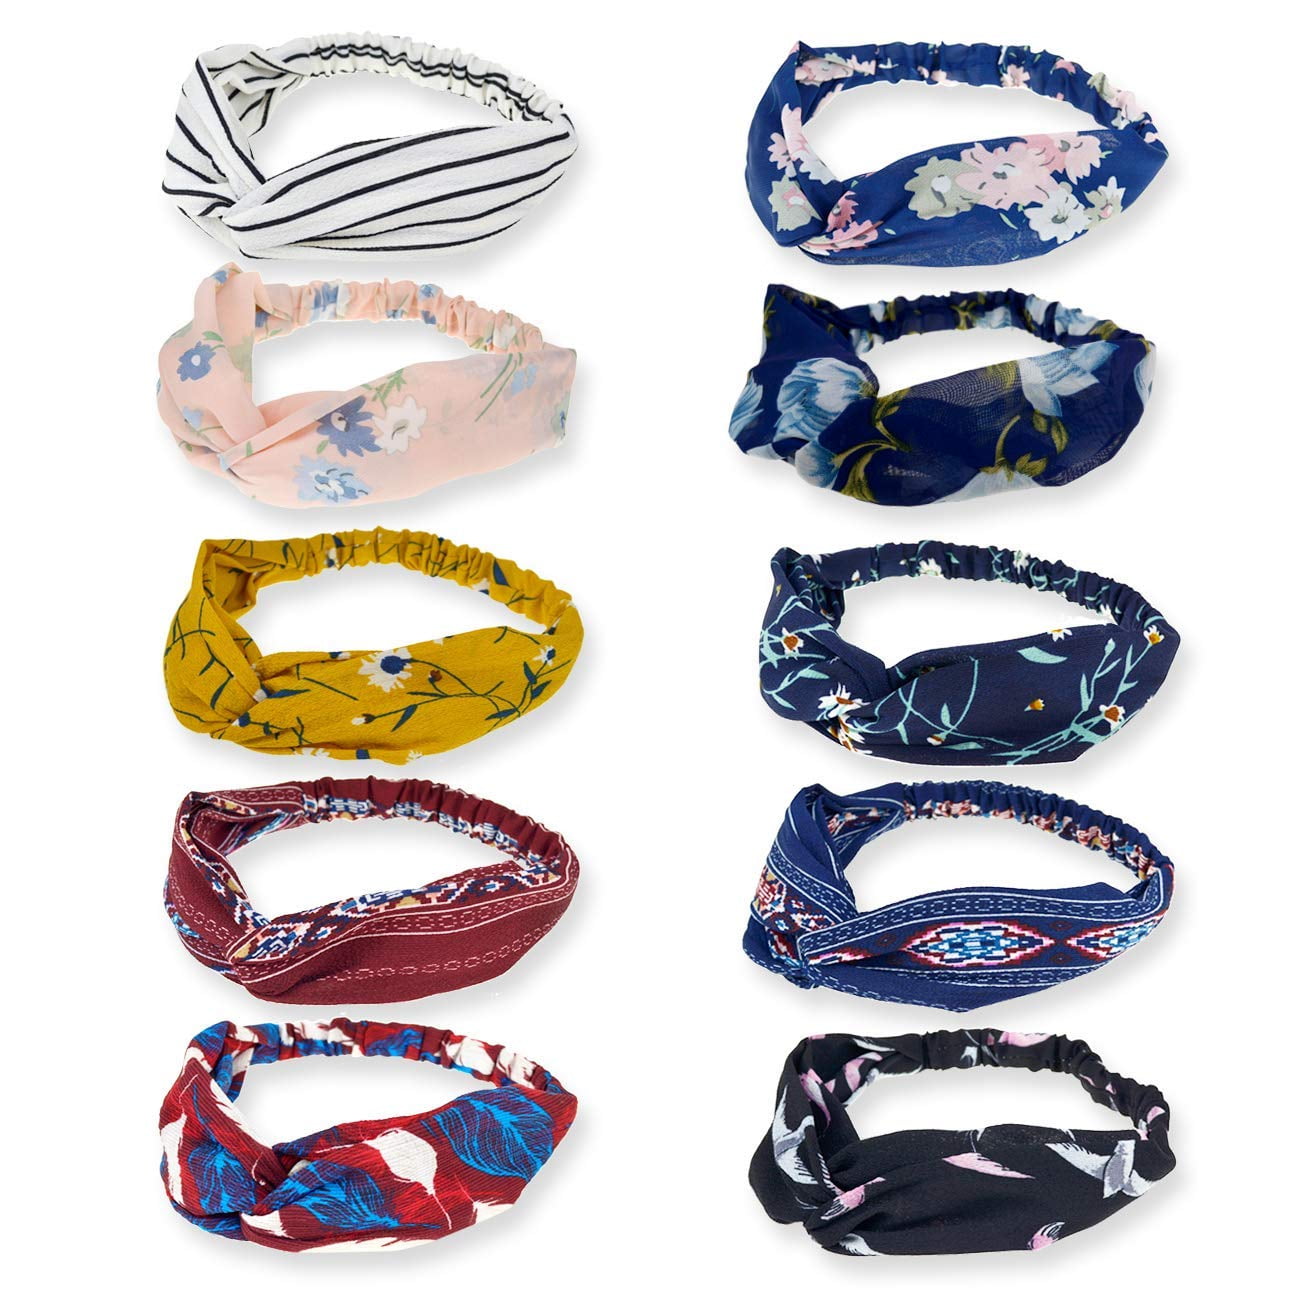 10 Pack Boho Headbands for Women Flower Printing Twisted Knot Elastic Headbands Women Hair Band Accessories